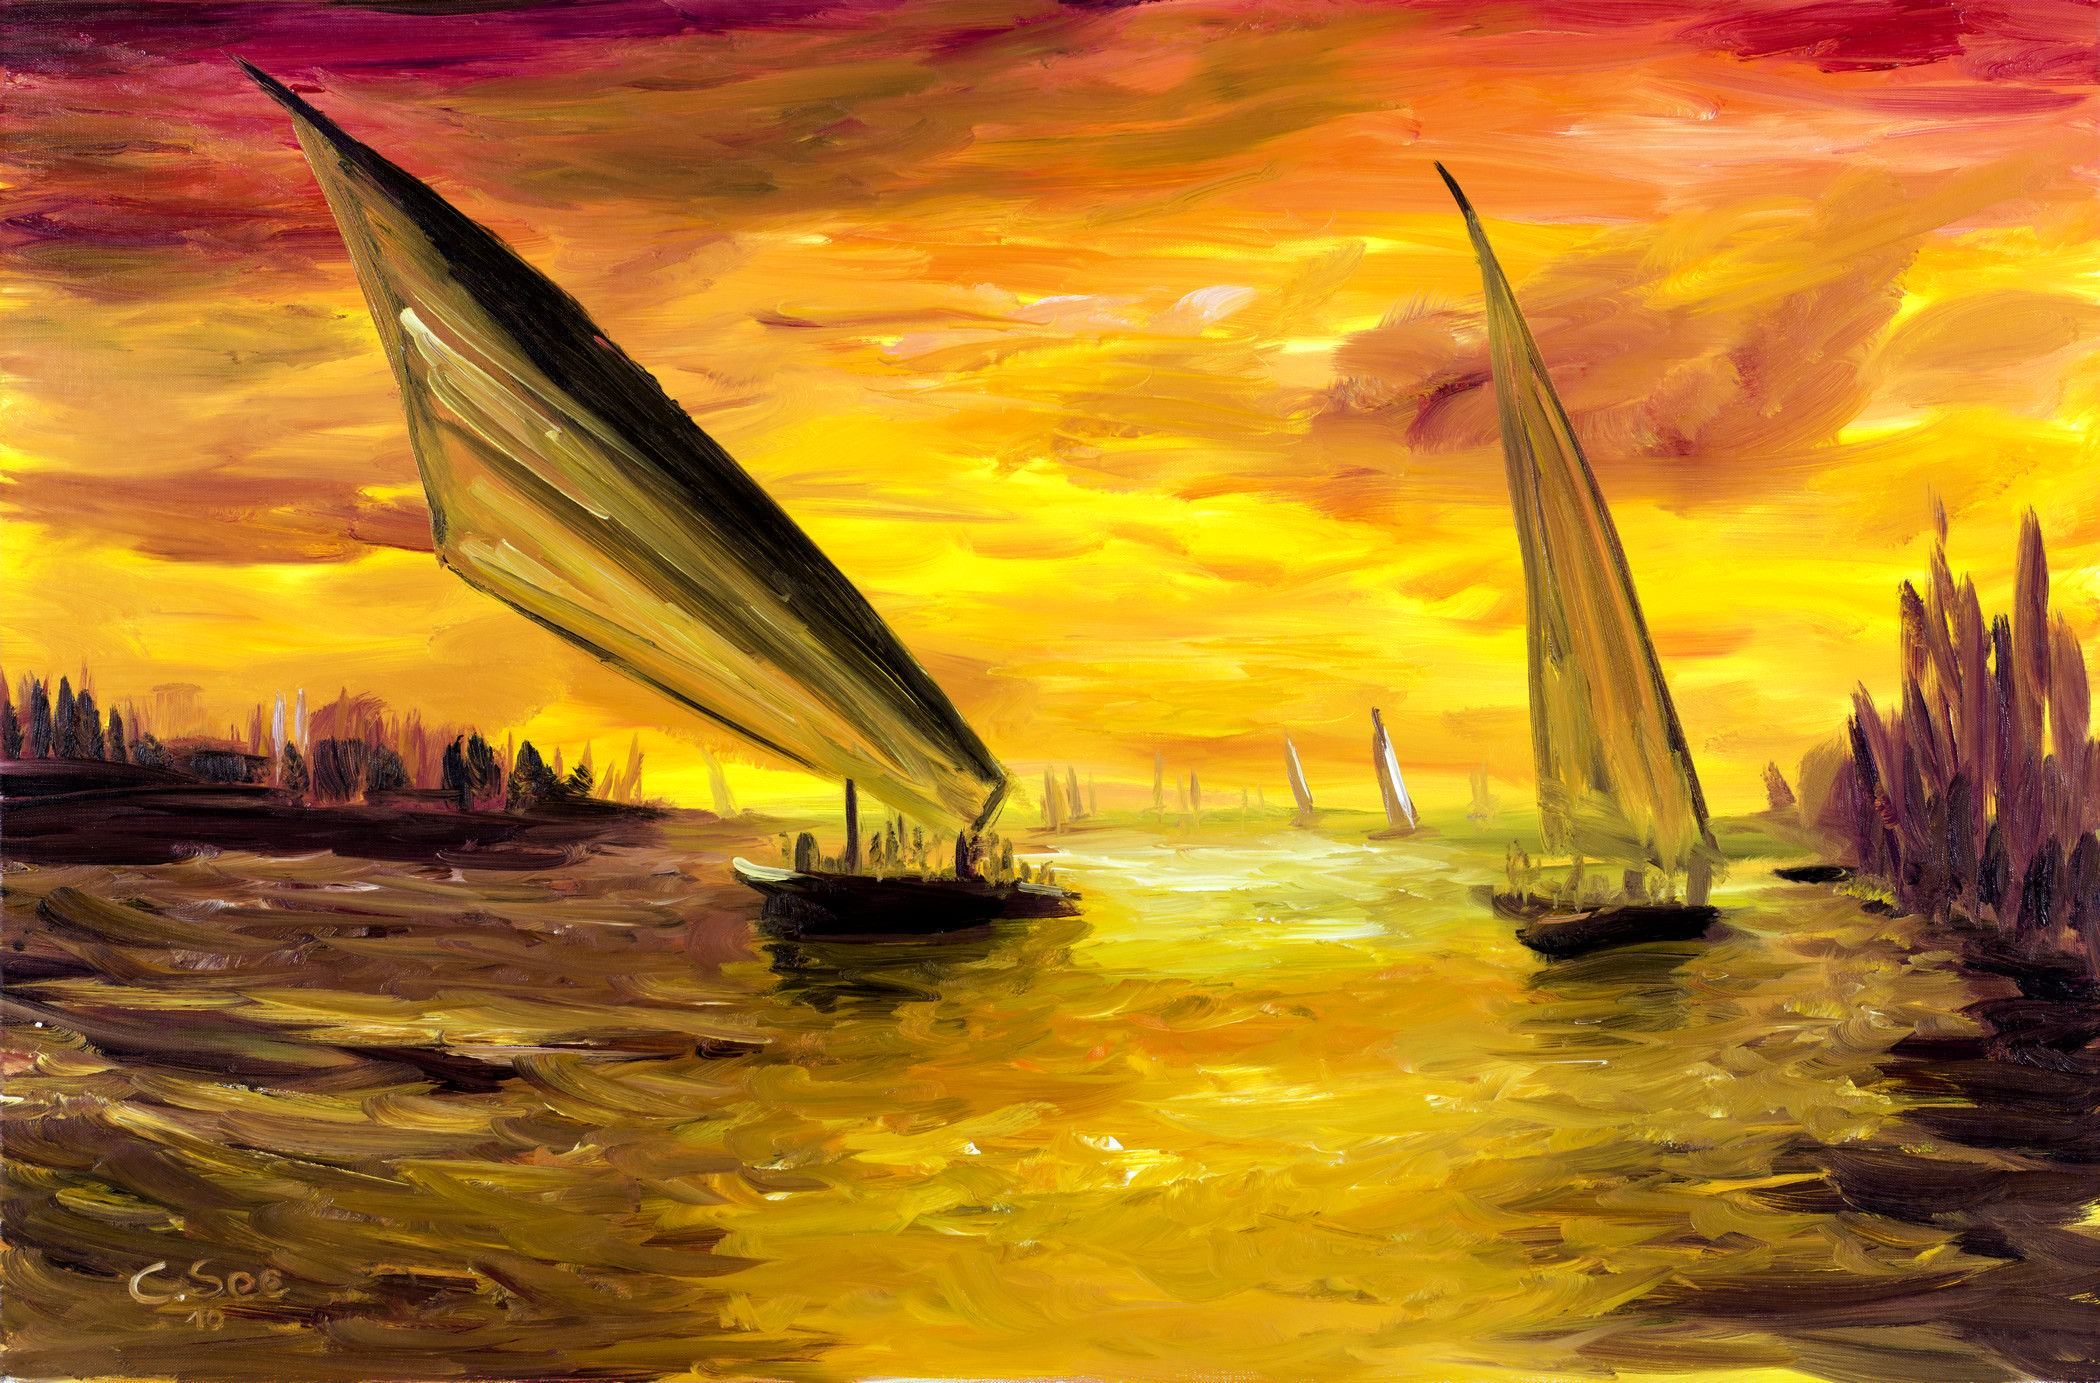 Feluks at the Nile in Egypt oil painting by Christian Seebauer